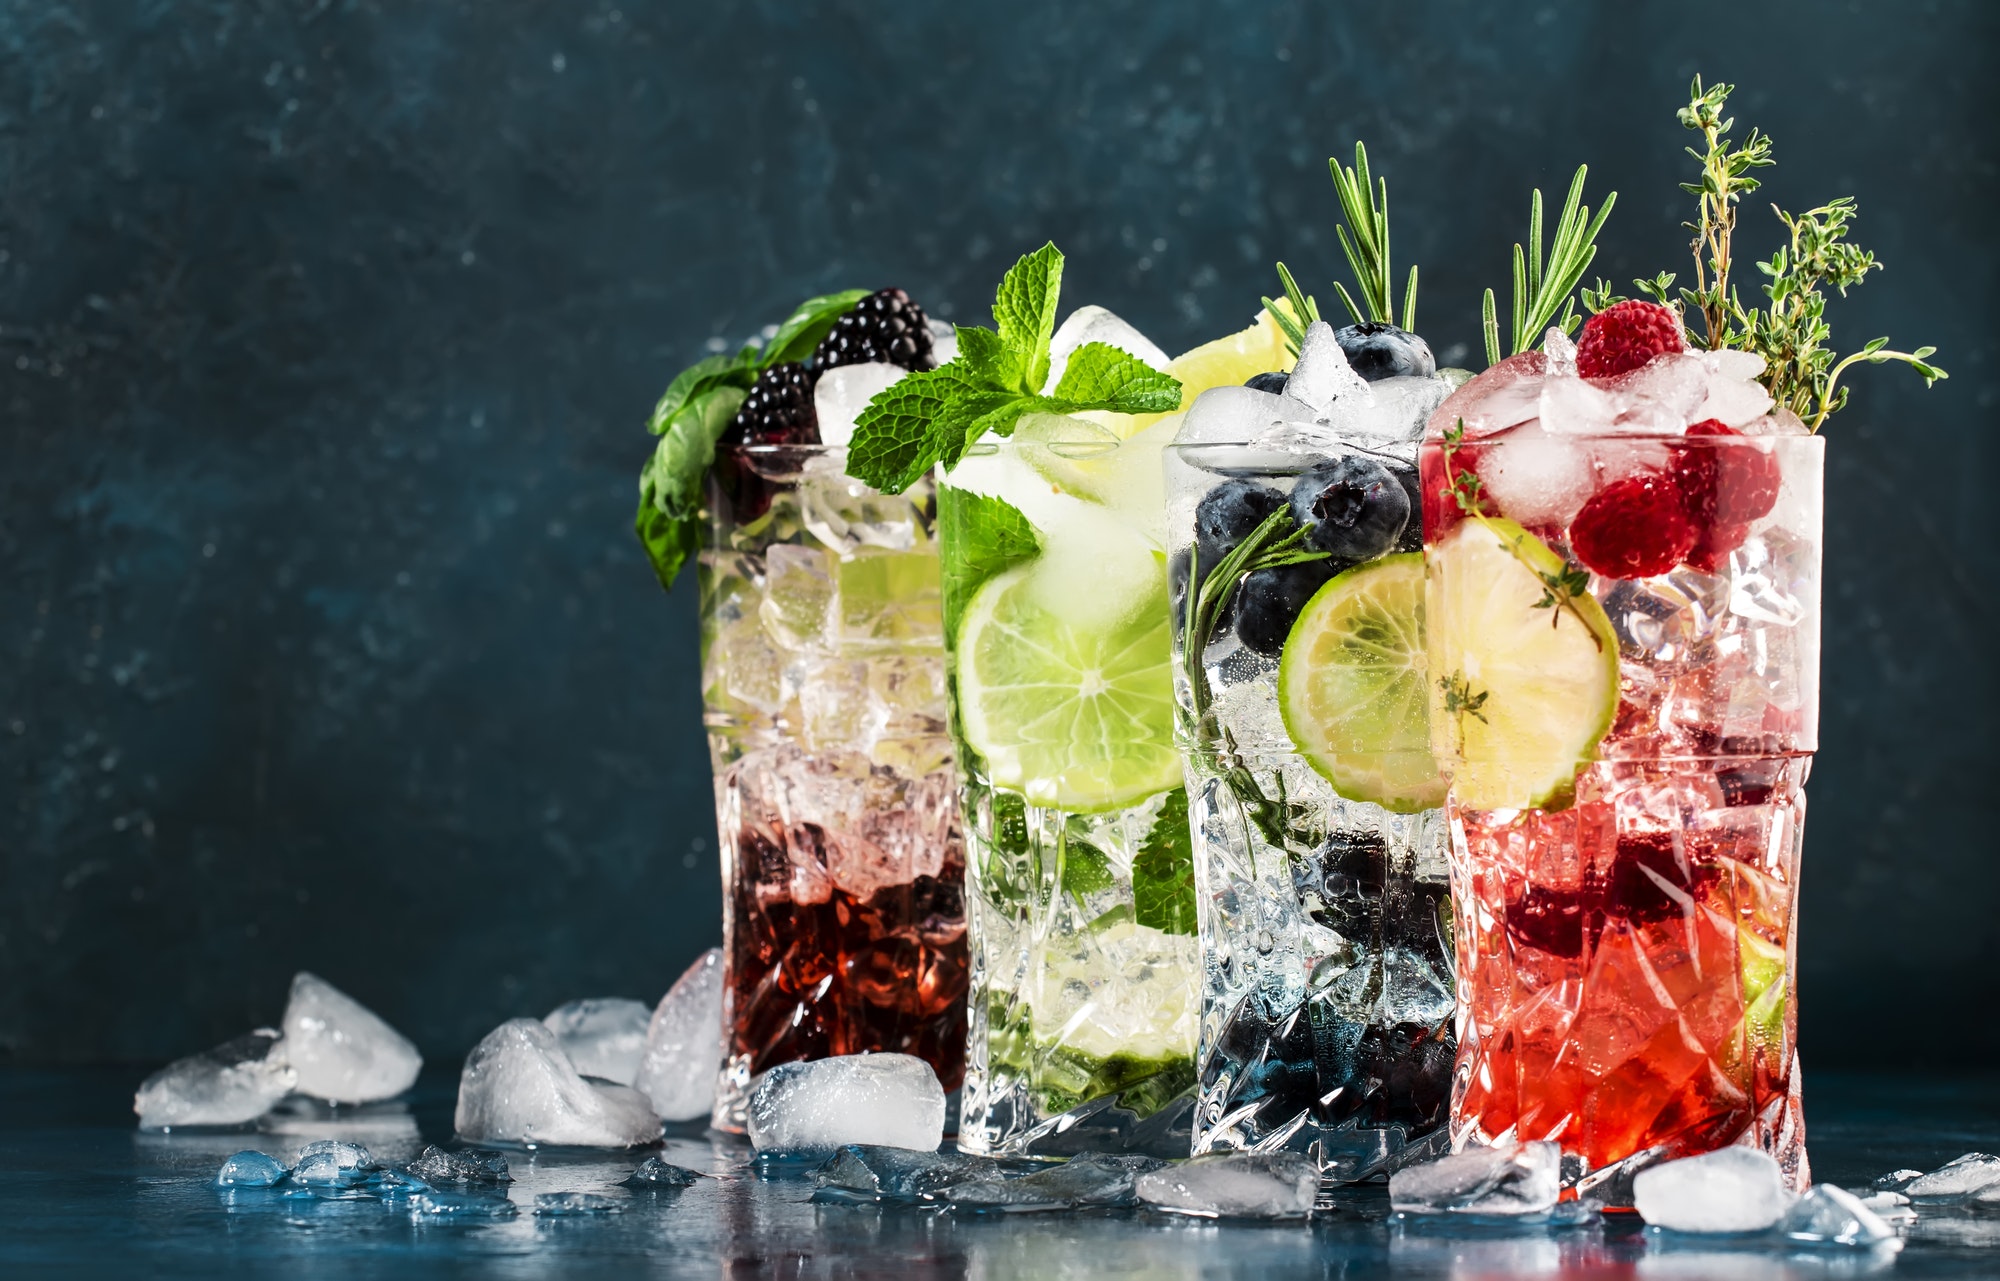 Cocktails drinks. Classic alcoholic long drink or mocktail highballs with berries, lime, herbs